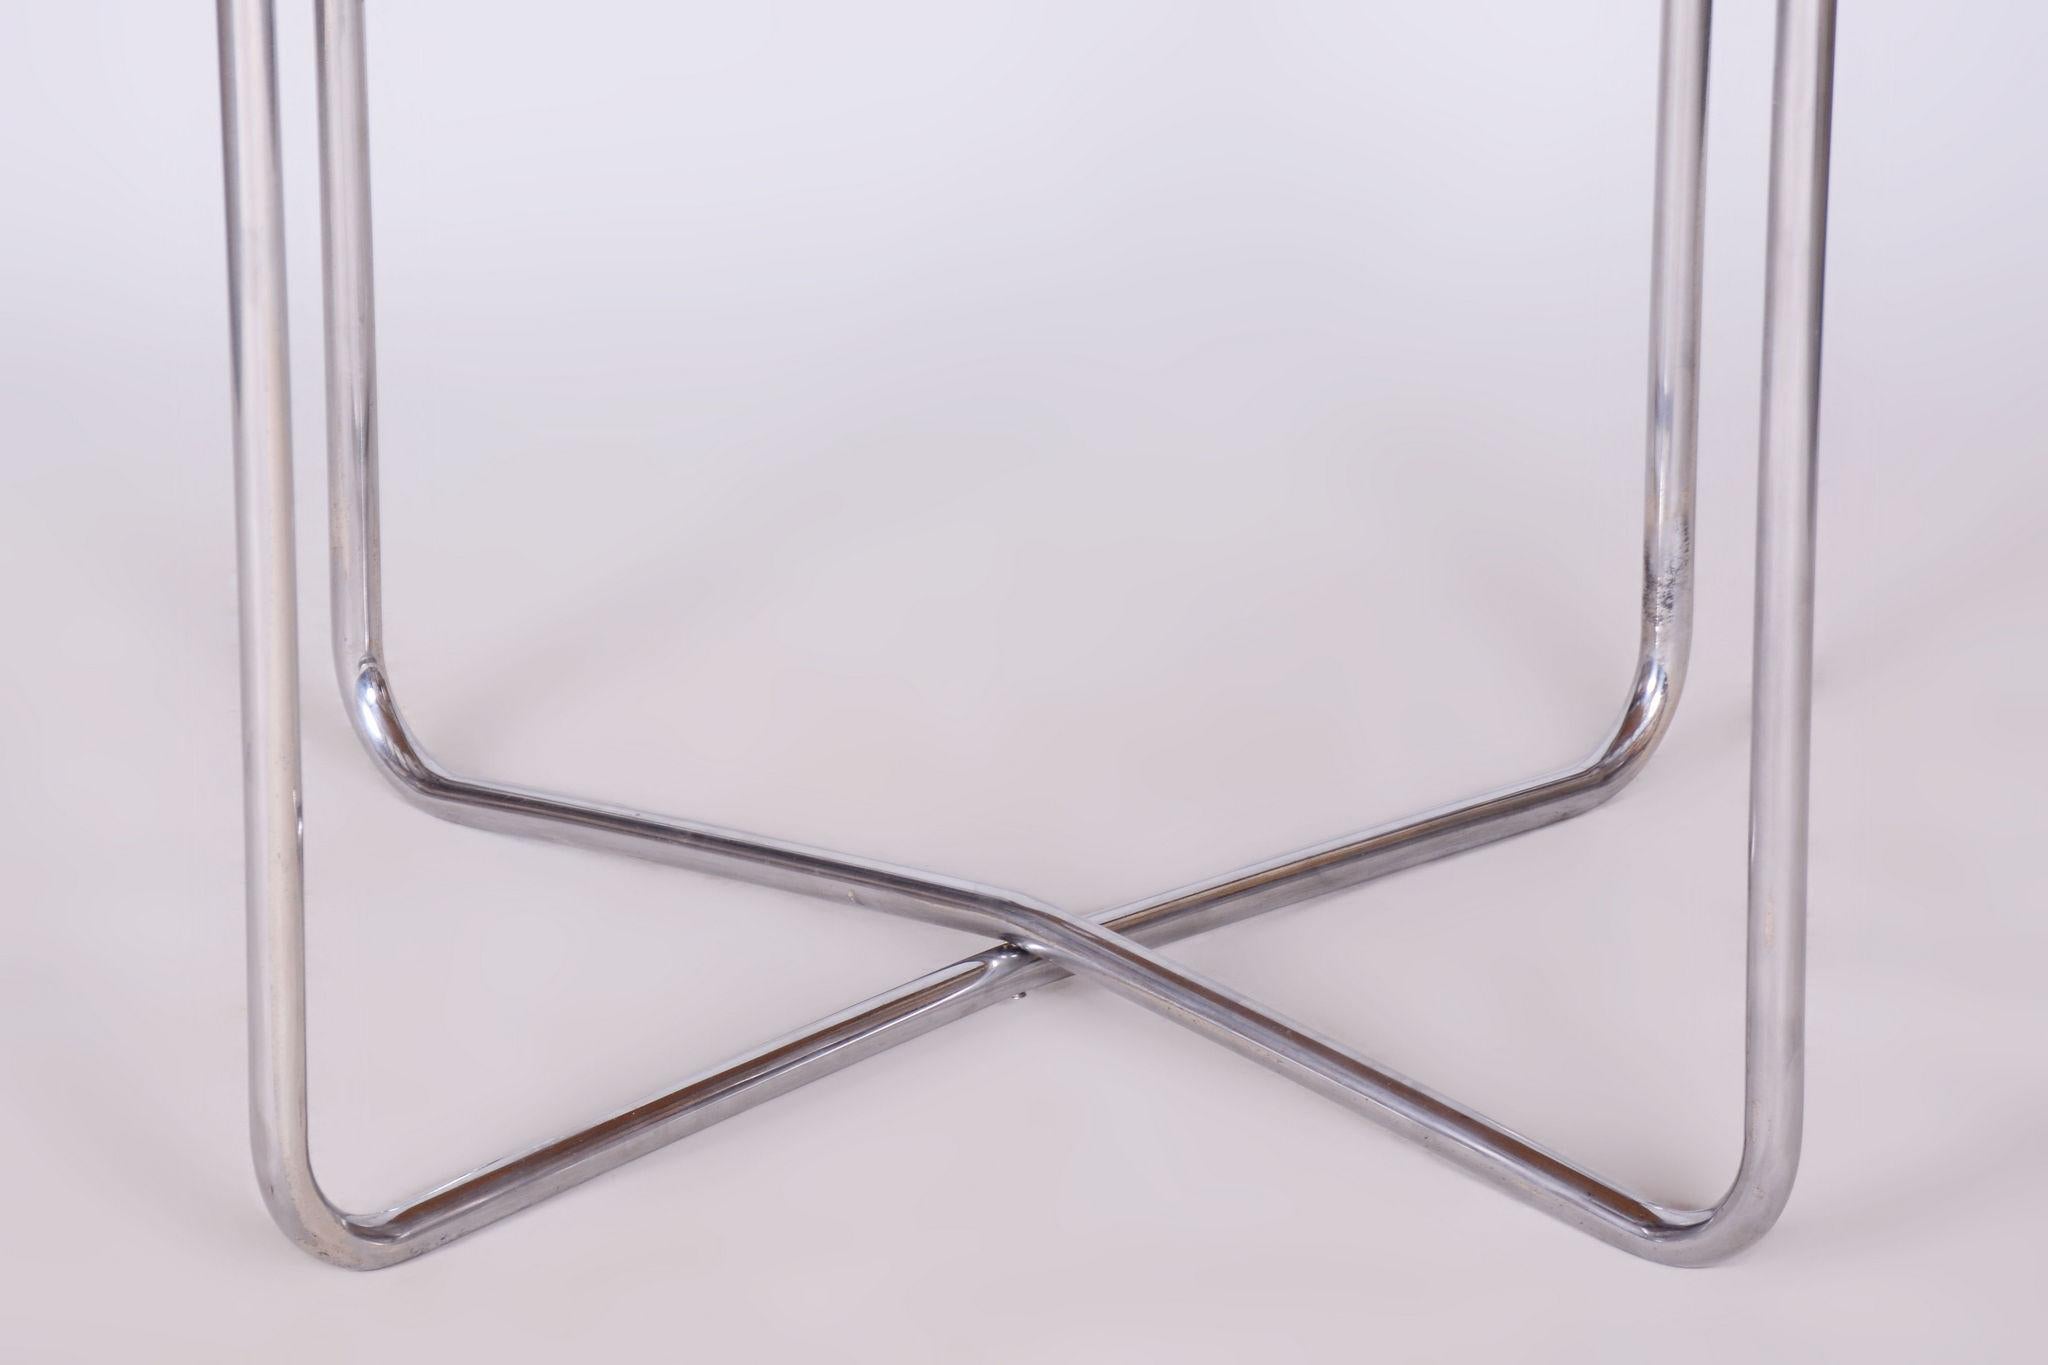 Restored Bauhaus Table, by Hynek Gottwald, Chrome-Plated Steel, Czech, 1930s In Good Condition For Sale In Horomerice, CZ